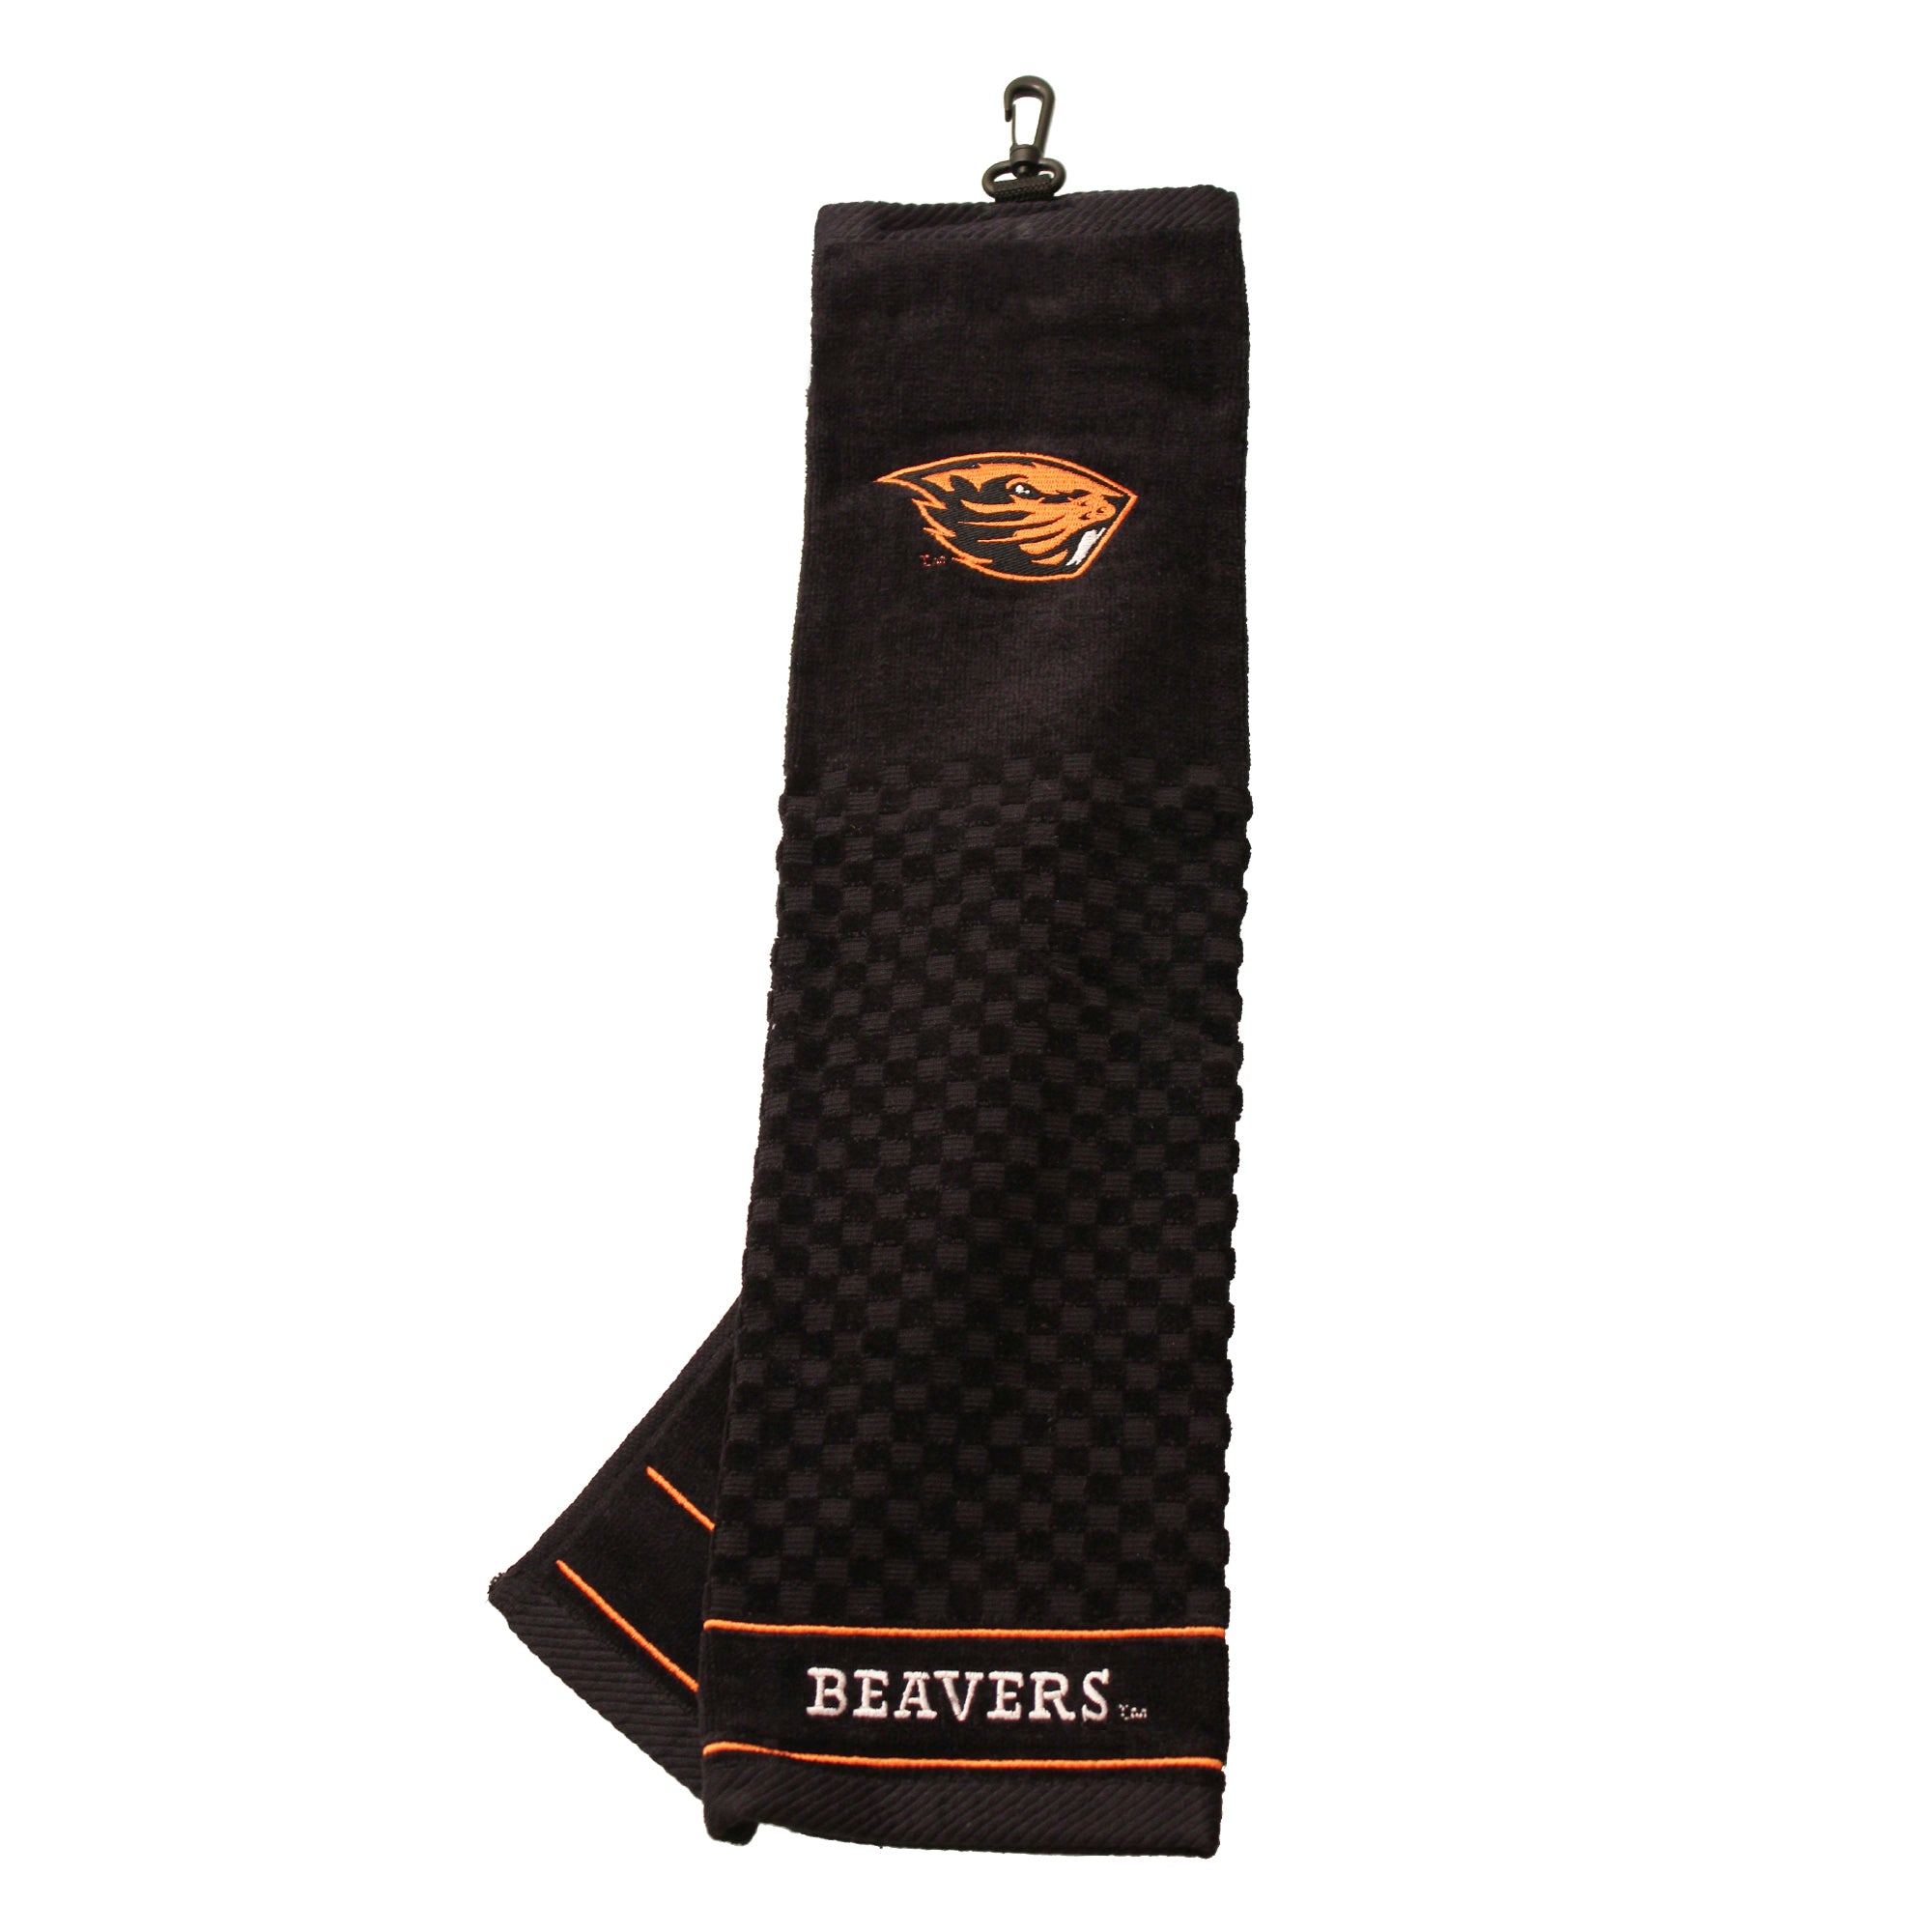 Oregon State Beavers Embroidered Towel